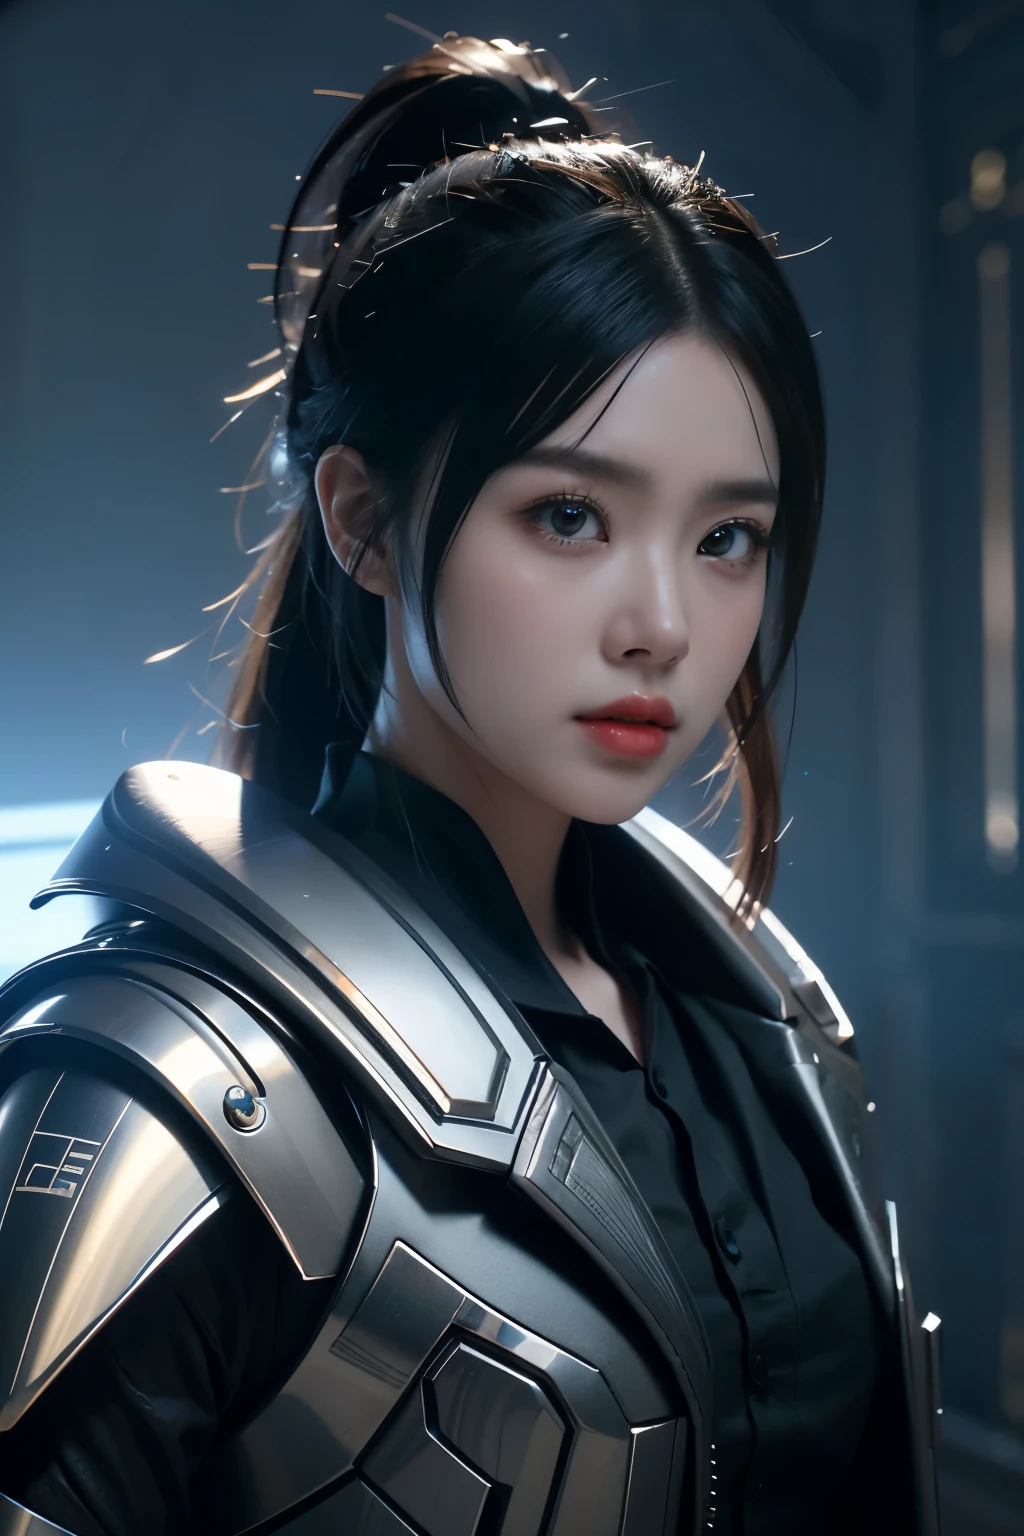 Game art，The best picture quality，Highest resolution，8K，((A bust photograph))，((Portrait))，(Rule of thirds)，Unreal Engine 5 rendering works， (The Girl of the Future)，(Female Warrior)， 22-year-old girl，(Female hackers)，(Ancient Oriental hairstyle)，(A beautiful eye full of detail)，(Big breasts)，(Eye shadow)，Elegant and charming，indifferent，((Frown))，(Battle wear full of futuristic tech，Clothing combines futuristic power armor and police uniforms，The garments are adorned with glittering patterns and badges)，Cyberpunk Characters，Future Style， Photo poses，City background，Movie lights，Ray tracing，Game CG，((3D Unreal Engine))，oc rendering reflection pattern